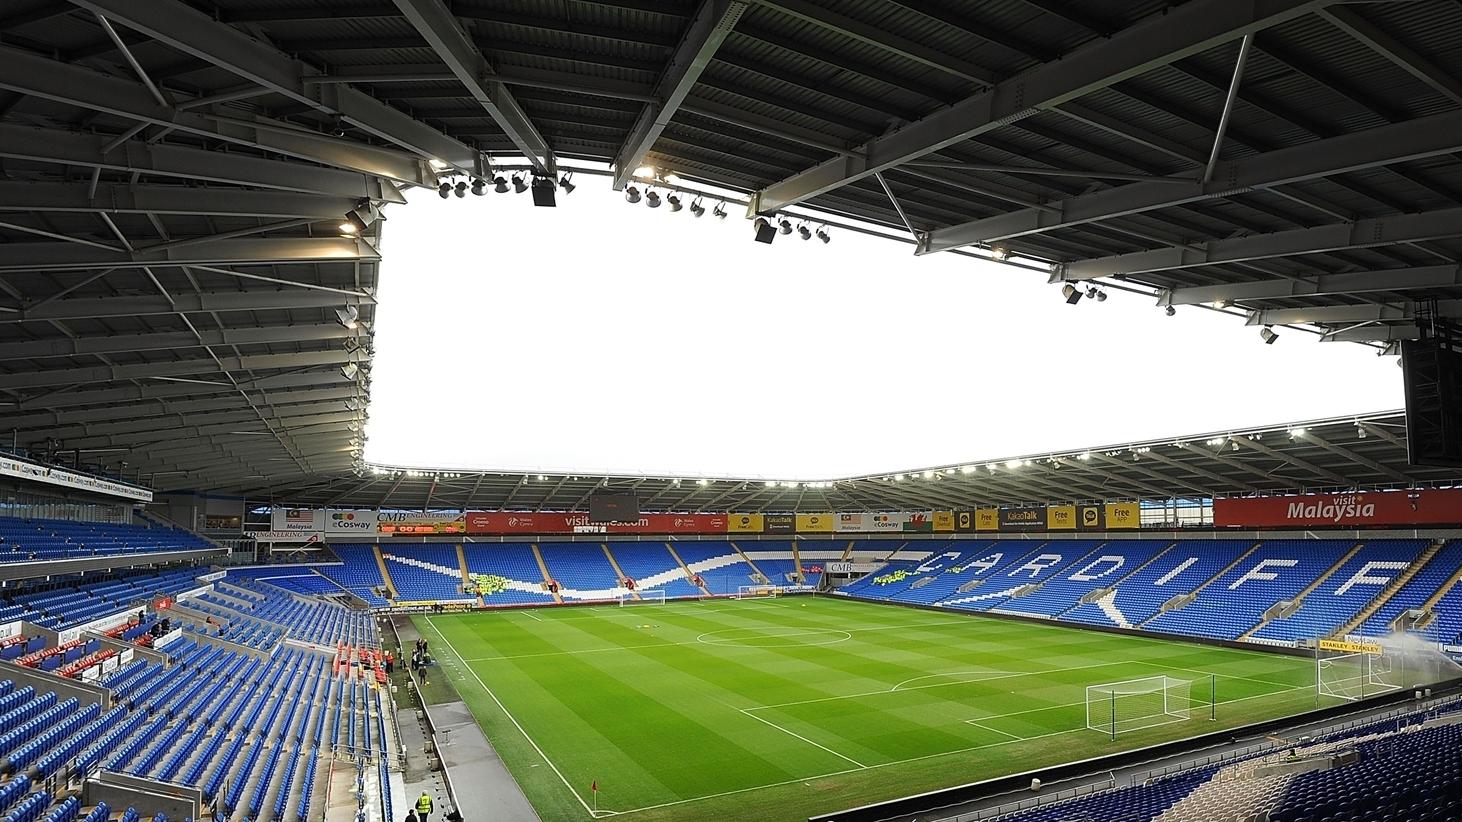 The extended Ninian Stand at Cardiff City Stadium once completed